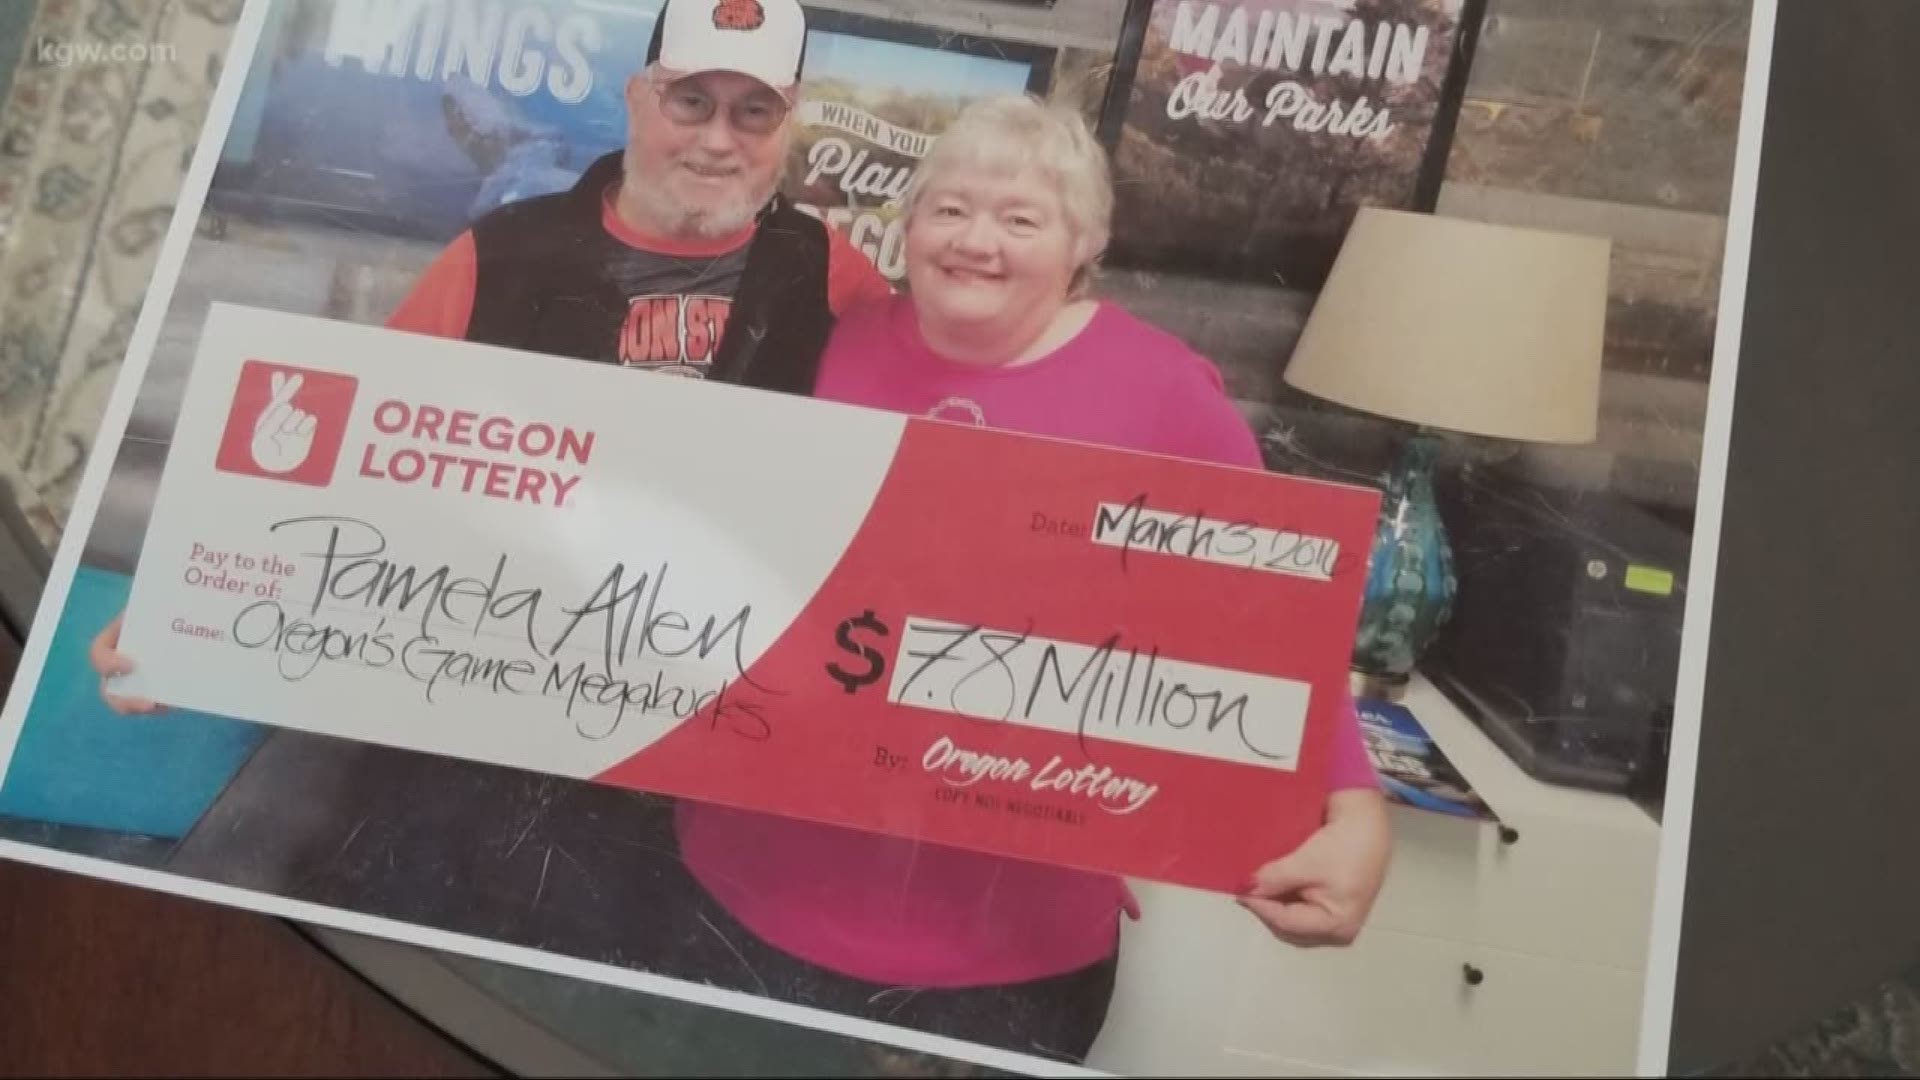 KGW investigative reporter Kyle Iboshi reached to Oregon lottery players who won $1 million or more. Their stories are uplifting, with some surprises.